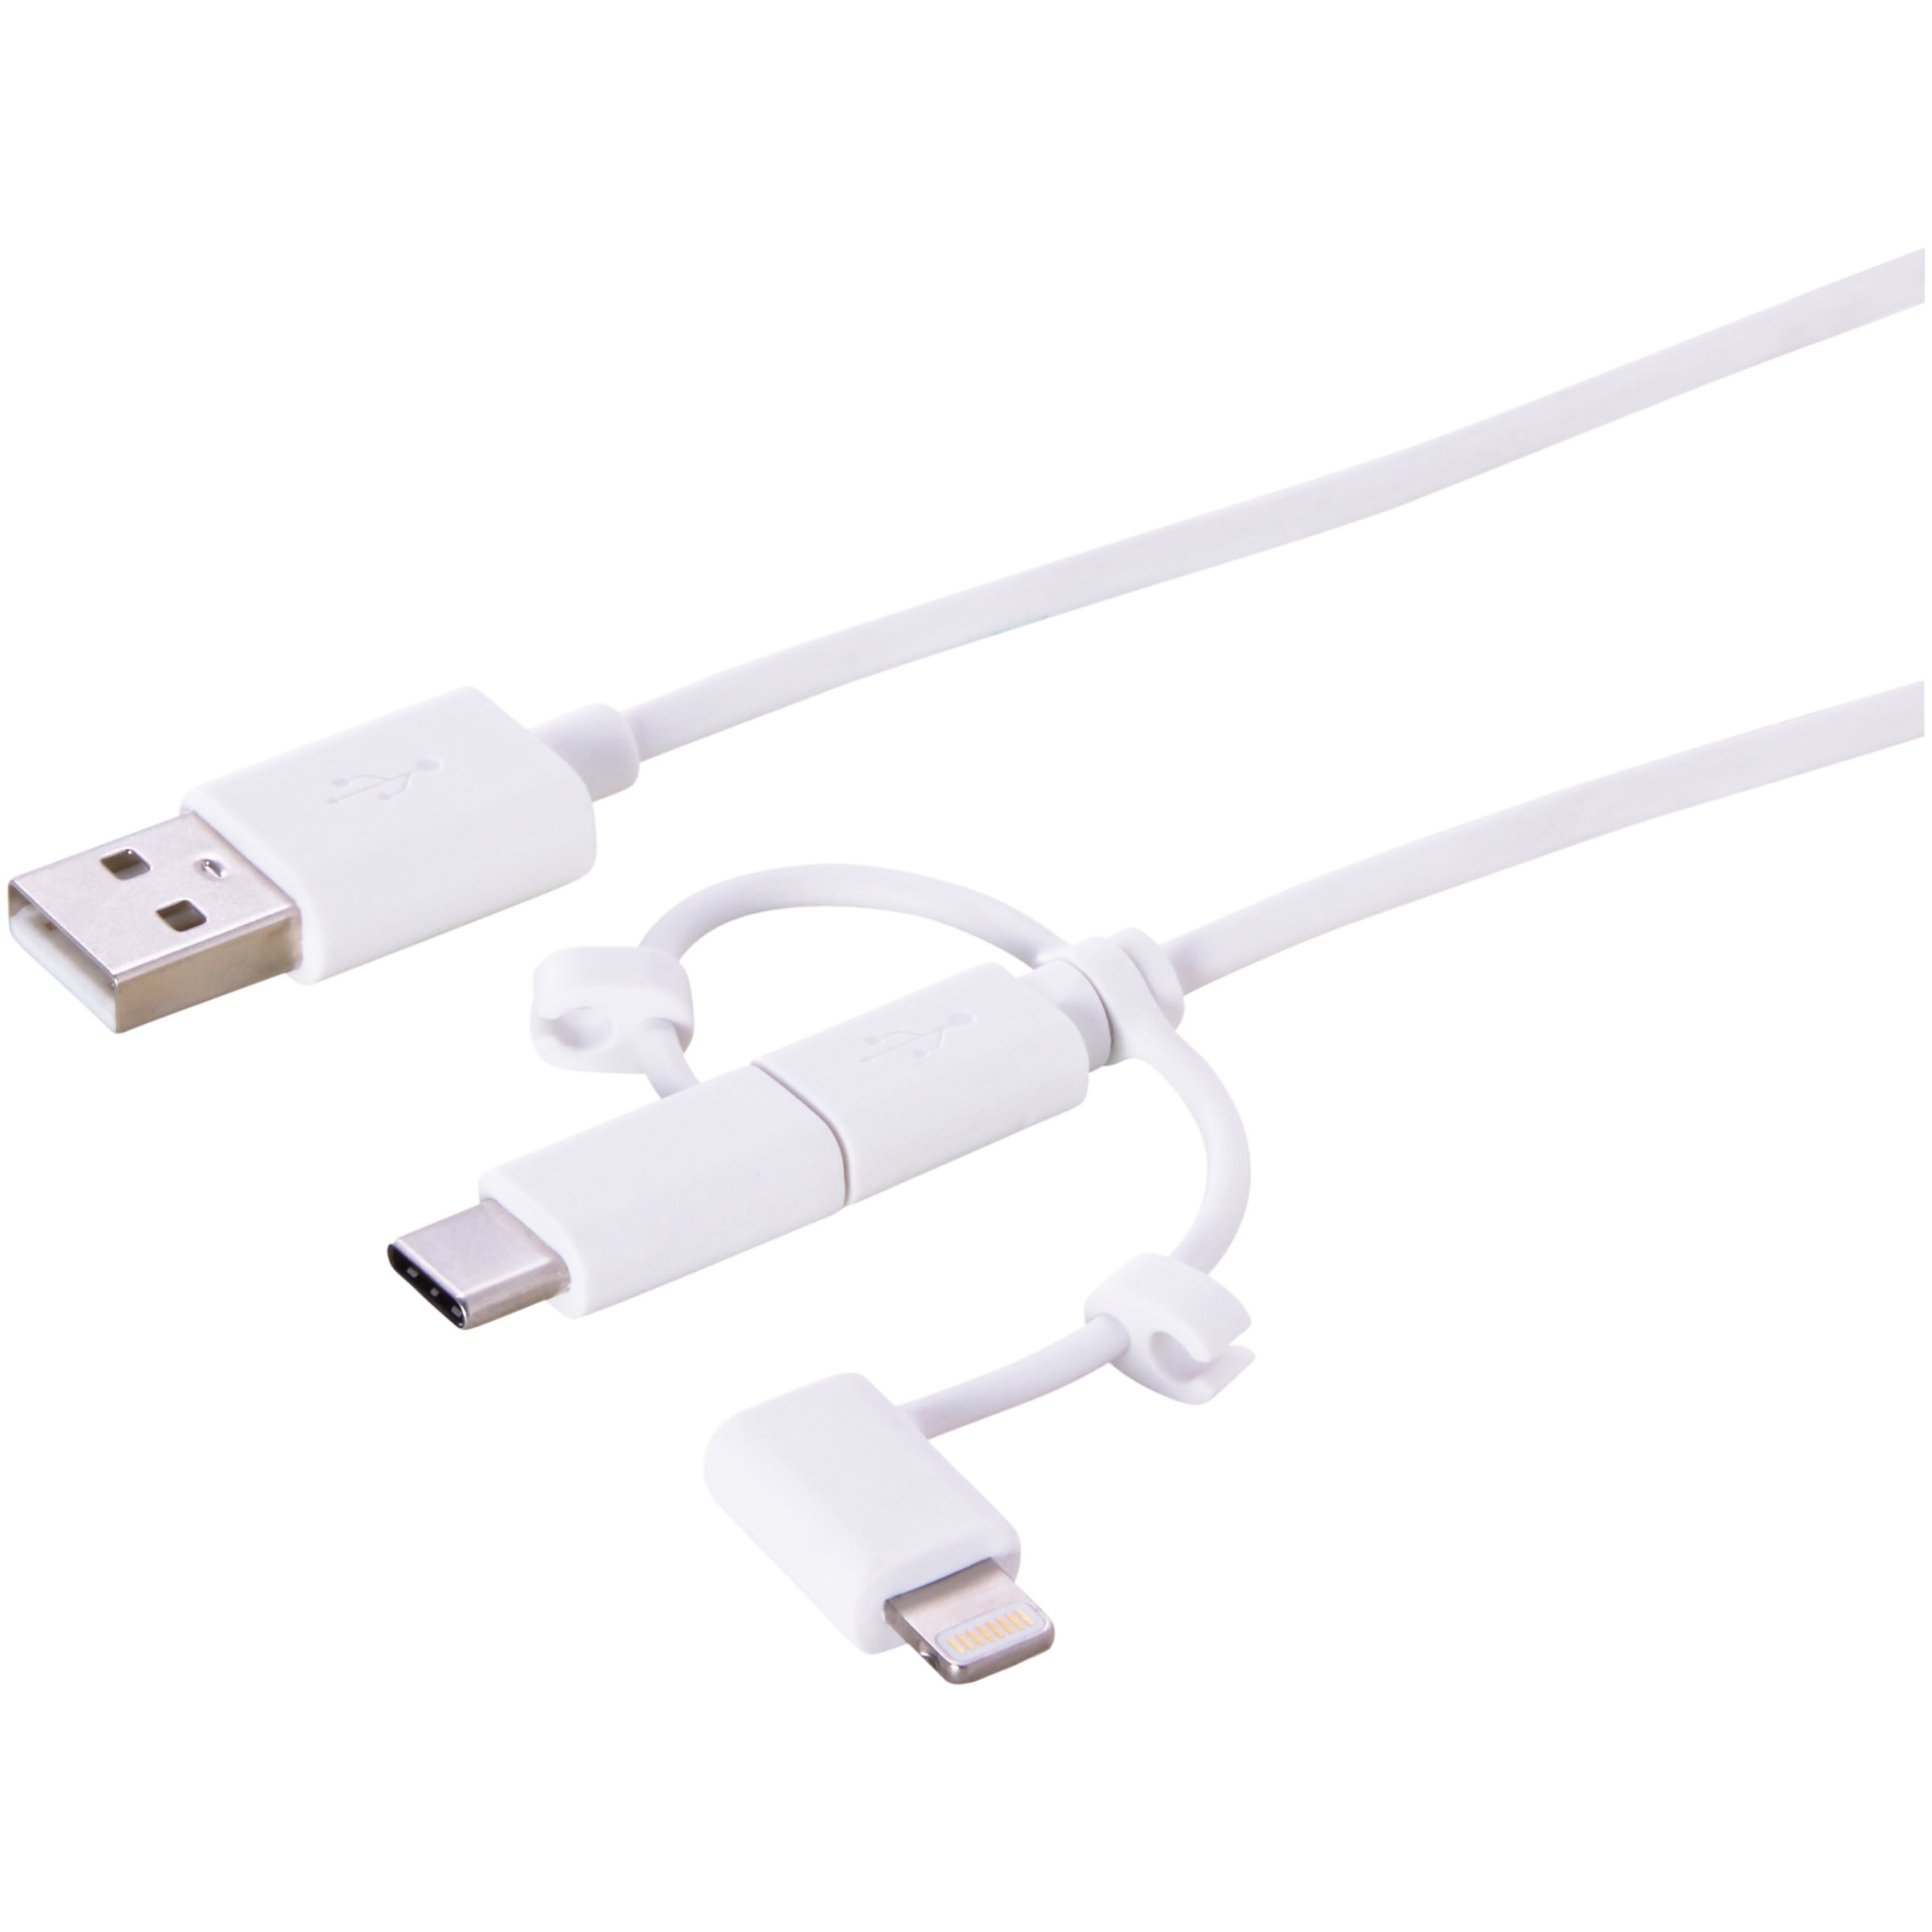 Android USB Charger Cable Autumn Maple Leaves and Other Leaves Multi 3 in 1 Retractable Cable Micro USB with Micro USB/Type C Compatible with Cell Phones Tablets and More